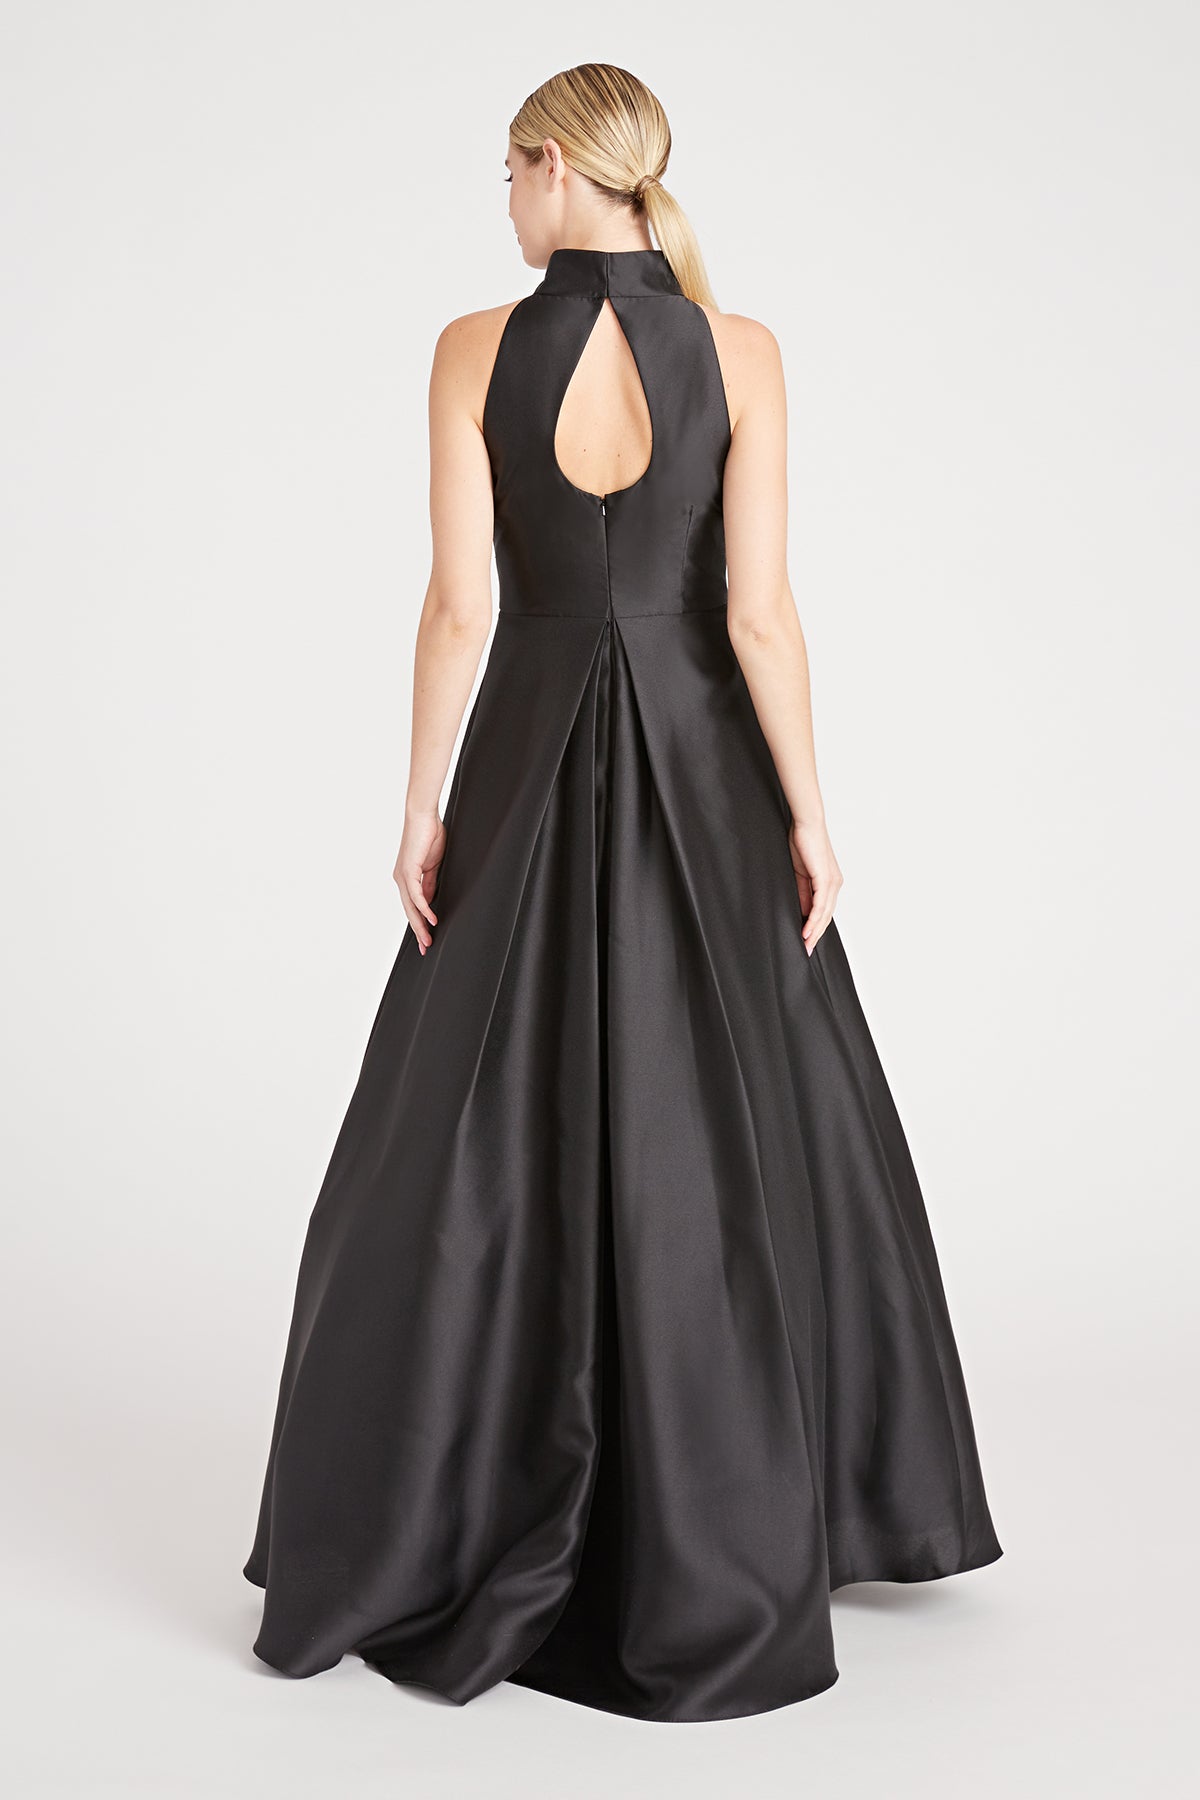 Monique Lhullier Halter Satin Ball Gown – Shop at the Mix